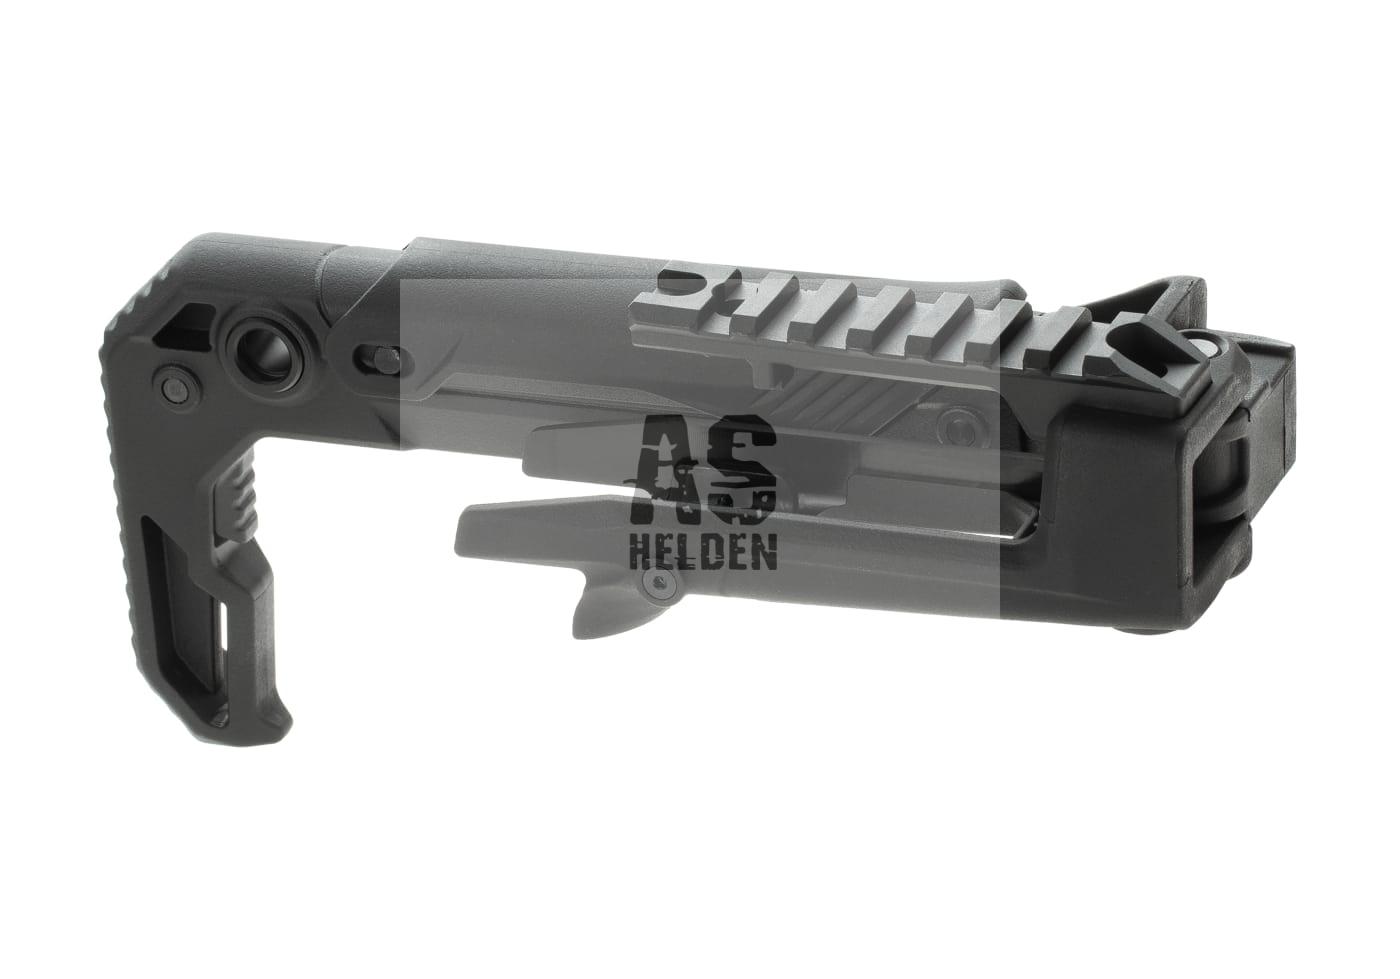 AAP01 Folding Stock - Schwarz (Action Army)